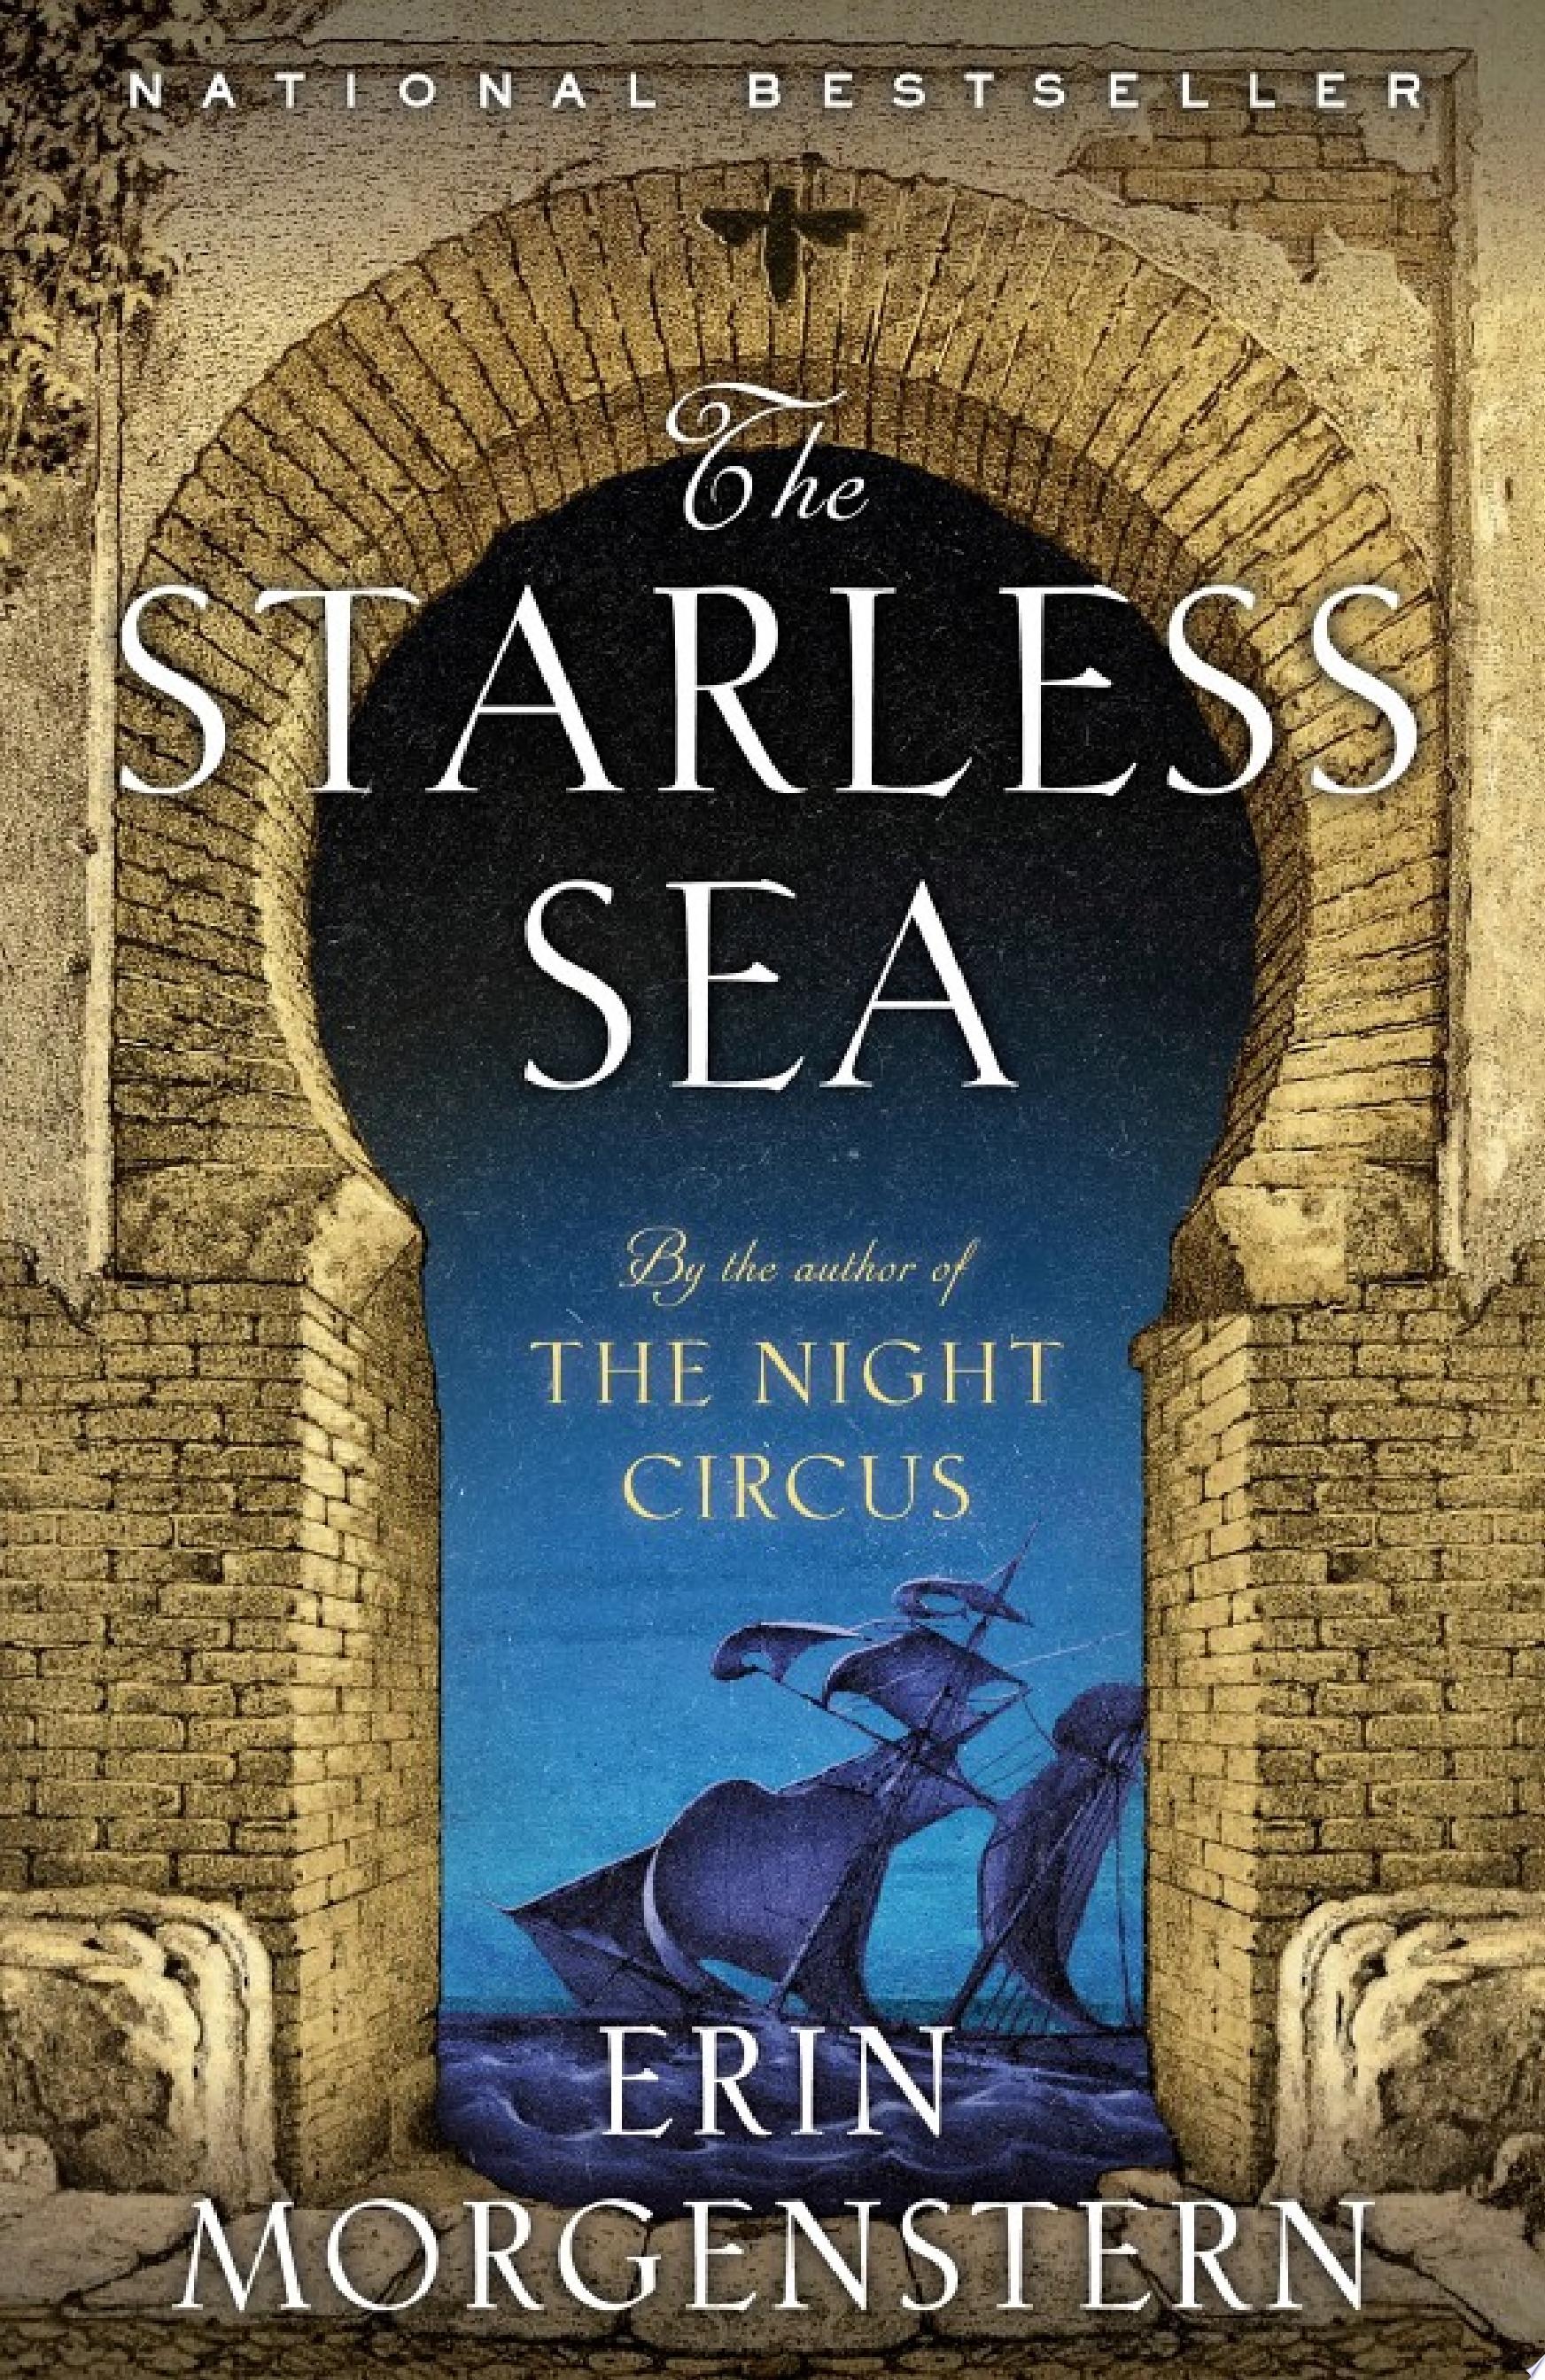 Image for "The Starless Sea"